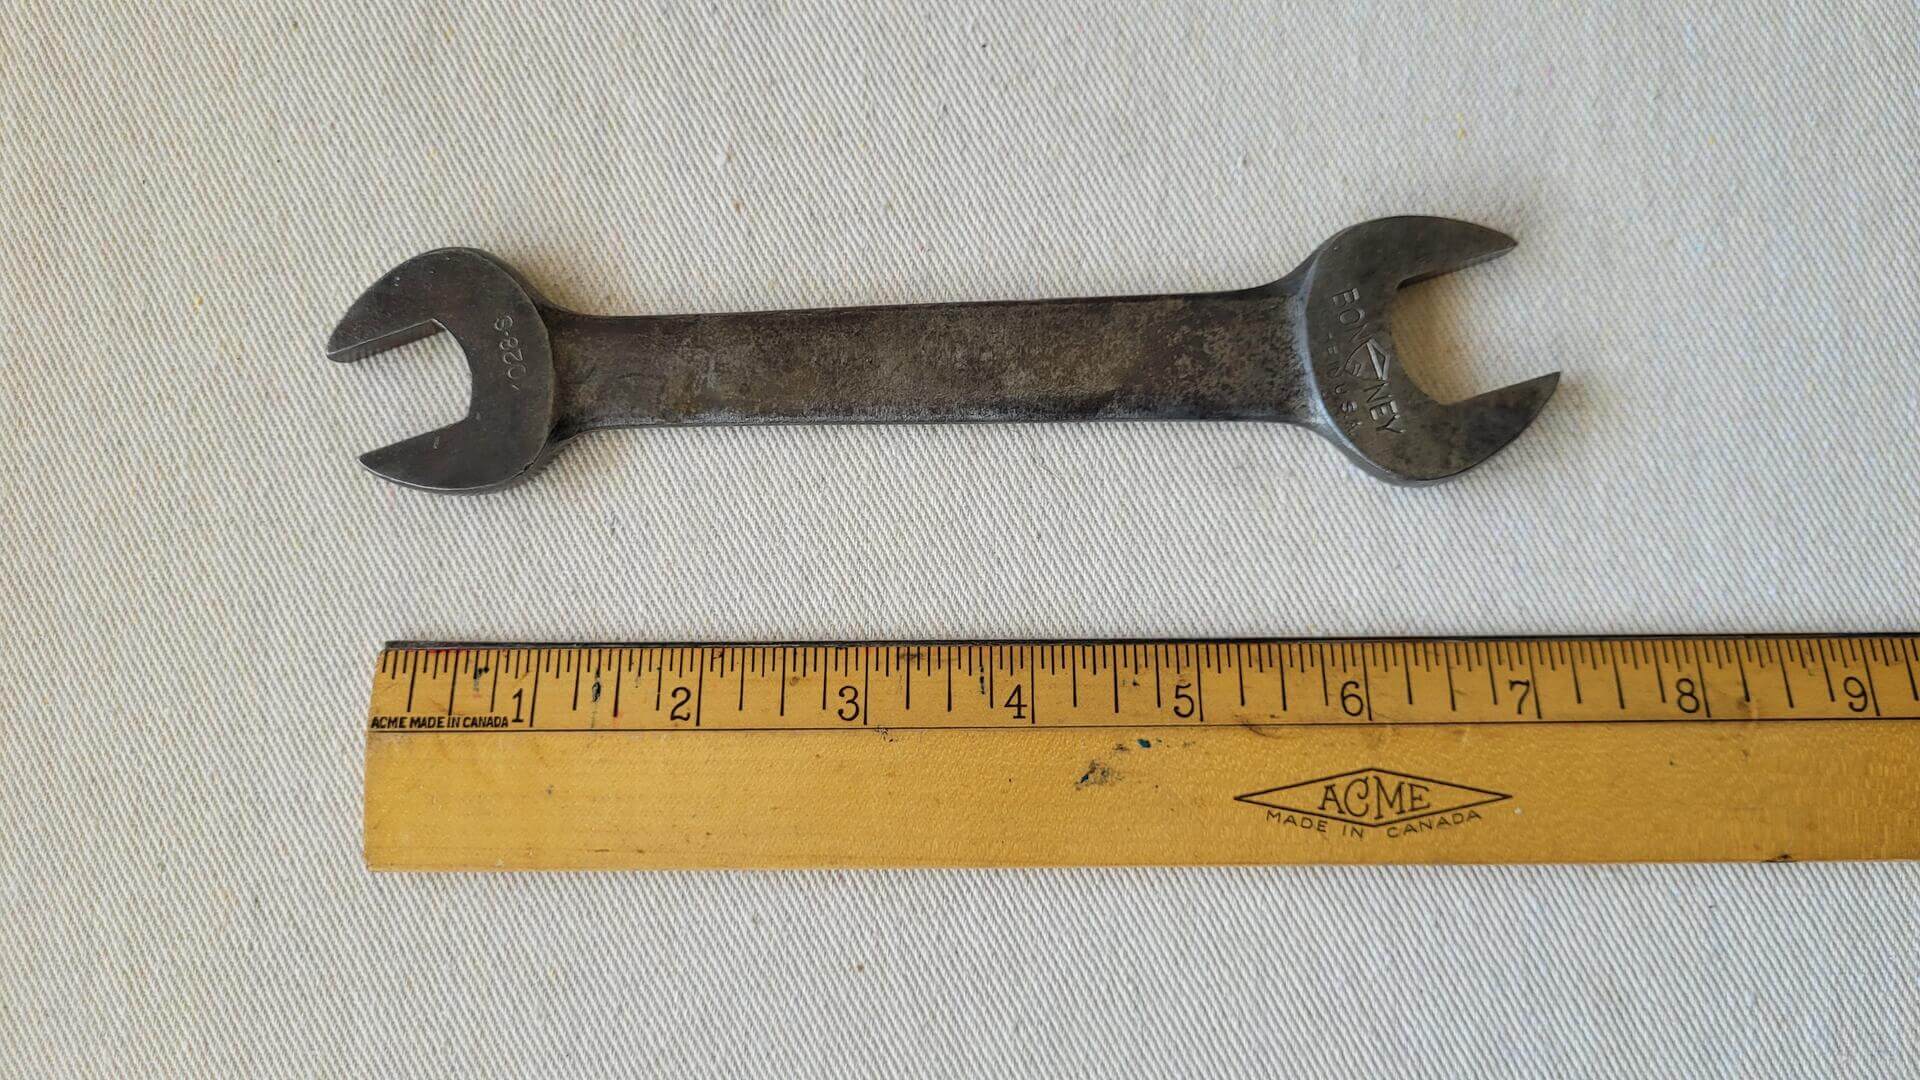 Antique heavy duty Bonney Tools & Forge chrome-vanadium open end spanner wrench 5/8" x 25/32". Vintage made in USA automotive and mechanic hand tools